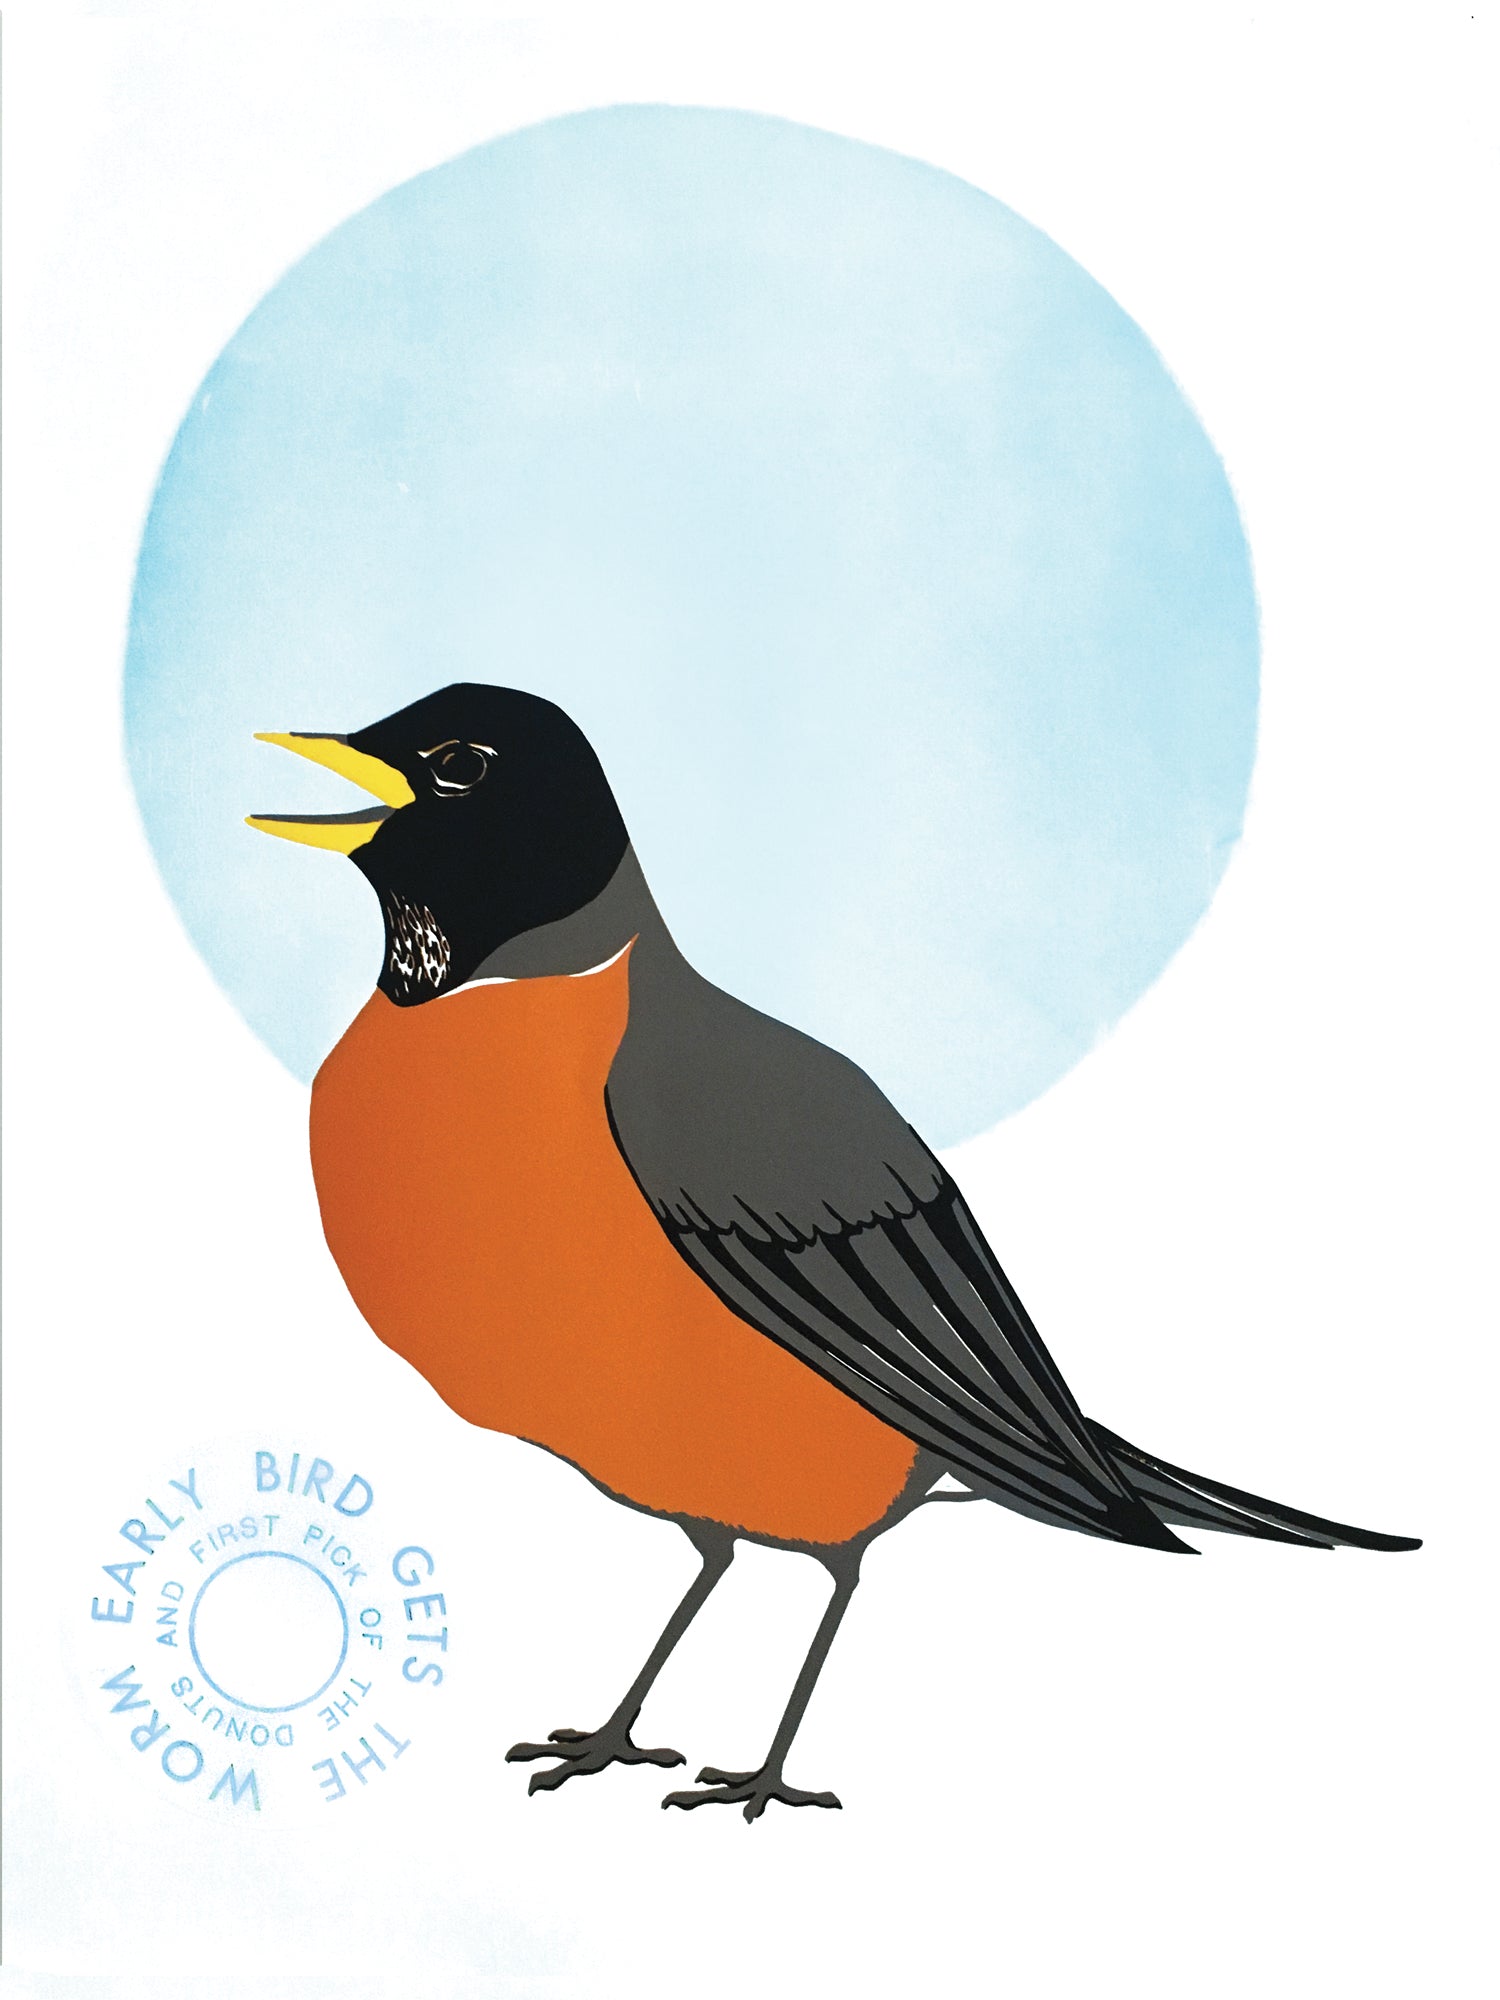 Letterpress & linoleum block print on white paper showing a 3/4 vies of a male American Robin with an orange chest, gray and black body and black head with a yellow beak. Its beak is slightly open. There is a large blue circle behind the upper part of the robin. To the left of the robin's feet is two lines of blue text that create concentric circles. The outer circle reads: "EARLY BIRD GETS THE WORM" the inner circle reads: "AND FIRST PICK OF THE DONUTS"